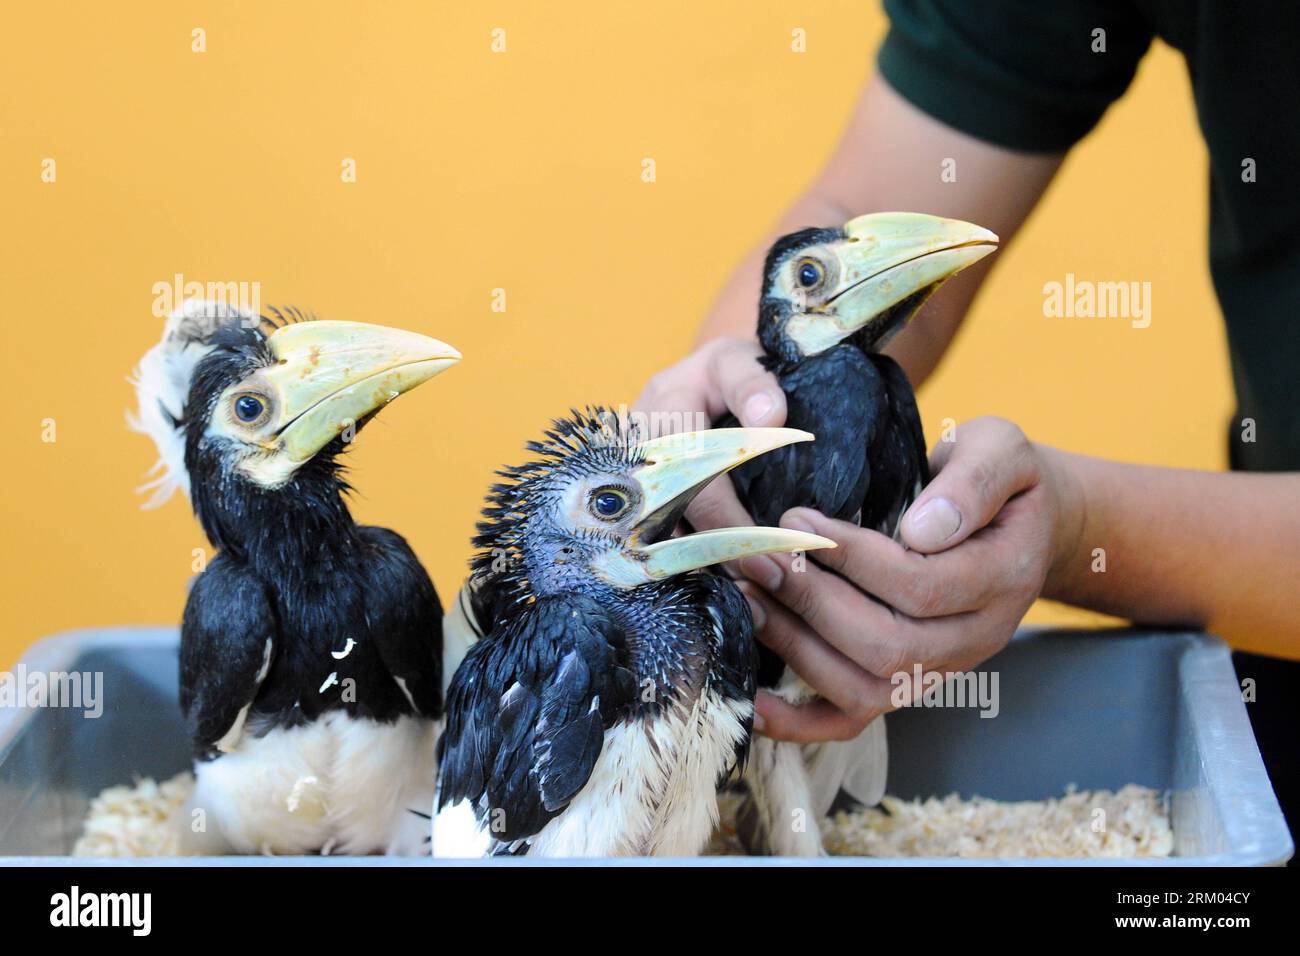 Bildnummer: 59320125  Datum: 08.03.2013  Copyright: imago/Xinhua (130308) -- SINGAPORE, March 8, 2013 (Xinhua) -- Three two-month old Oriental Pied Hornbills are displayed at the Jurong Bird Park s Breeding and Research Center in Singapore, March 8, 2013. These three birds were hatched after a successful artificial incubation at the bird park after their eggs were rescued on an off-shore island in Singapore. (Xinhua/Then Chi Wei) SINGAPORE-ORIENTAL PIED HORNBILLS-ARTIFICIAL INCUBATION PUBLICATIONxNOTxINxCHN Gesellschaft Tiere Zoo Aufzucht Vögel Orienthornvogel Fütterung x0x xrj 2013 quer Stock Photo